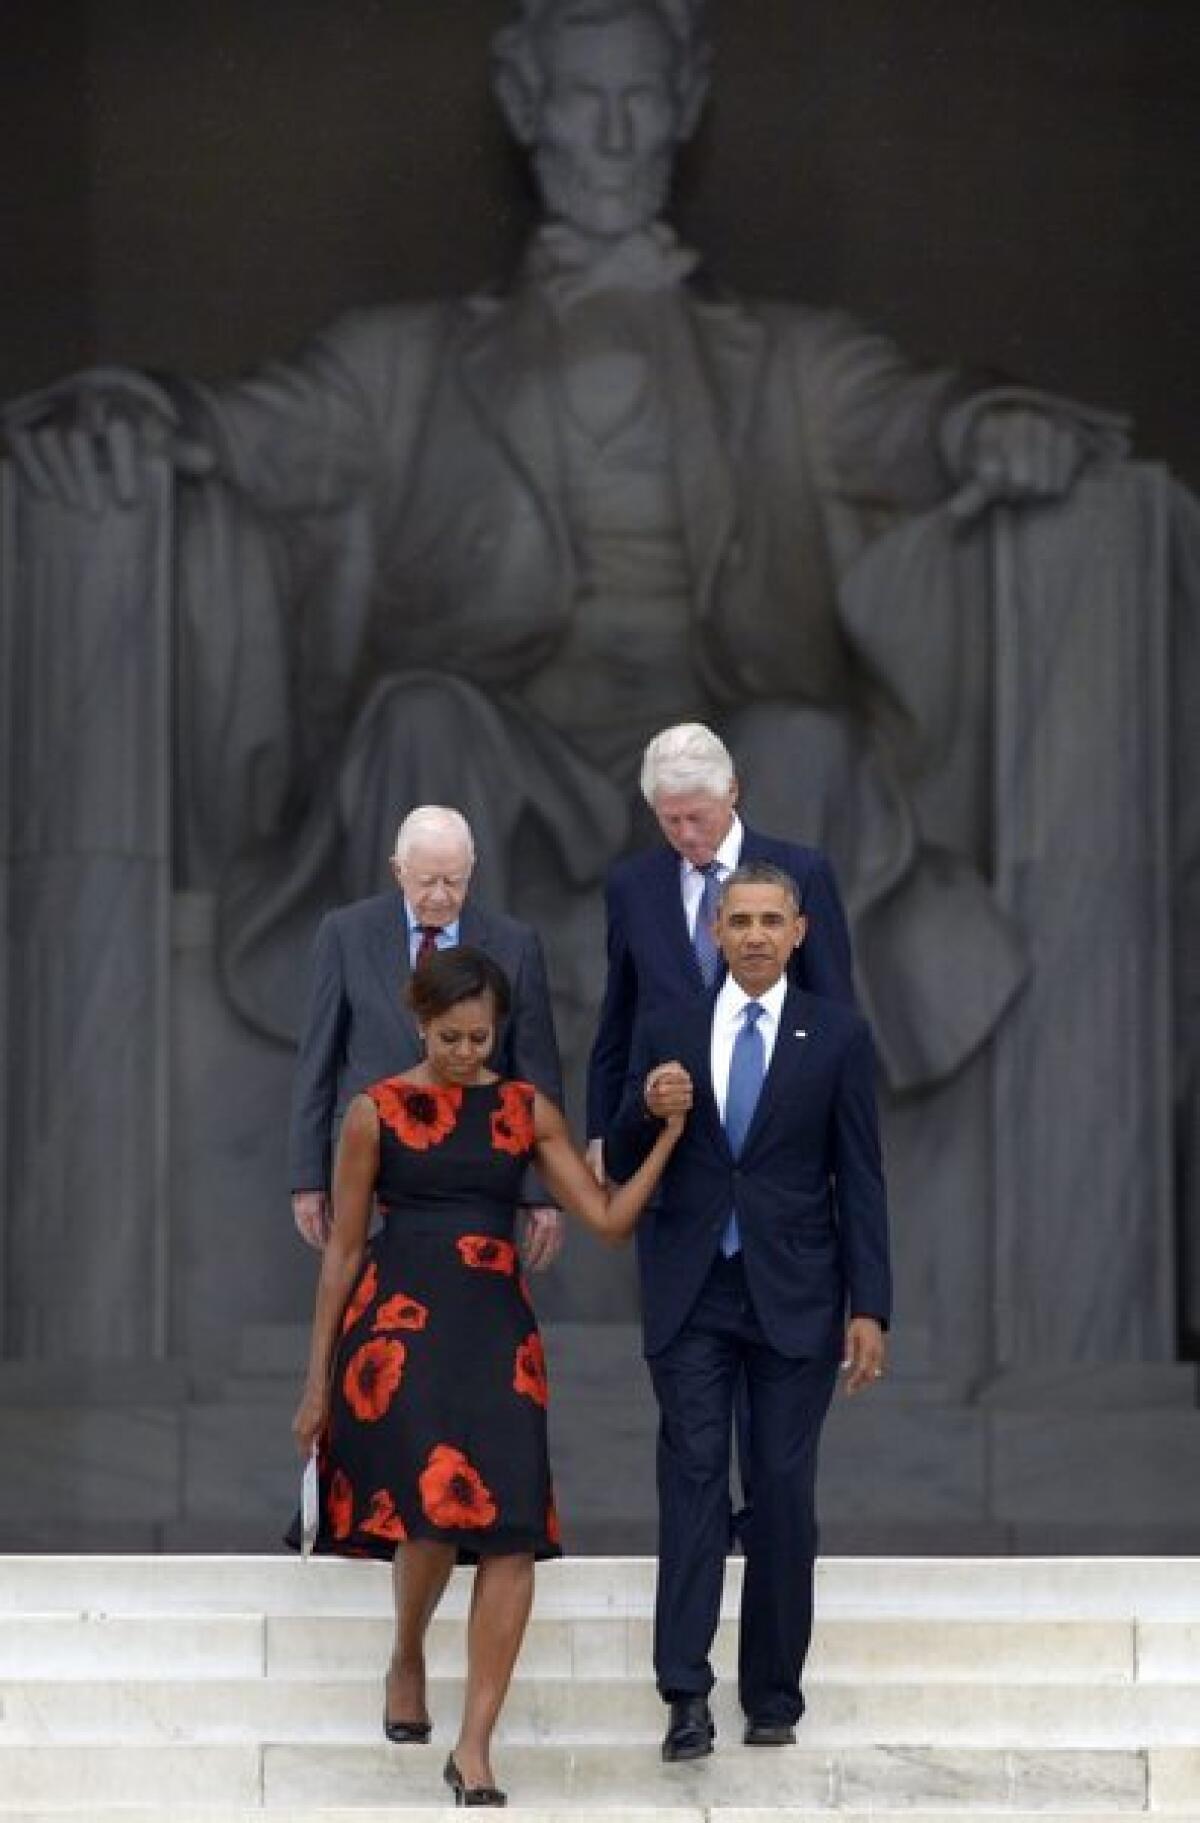 President Obama escorts First Lady Michelle Obama with former presidents Jimmy Carter and Bill Clinton during ceremonies at the Lincoln Memorial marking the 50th anniversary of the March on Washington.